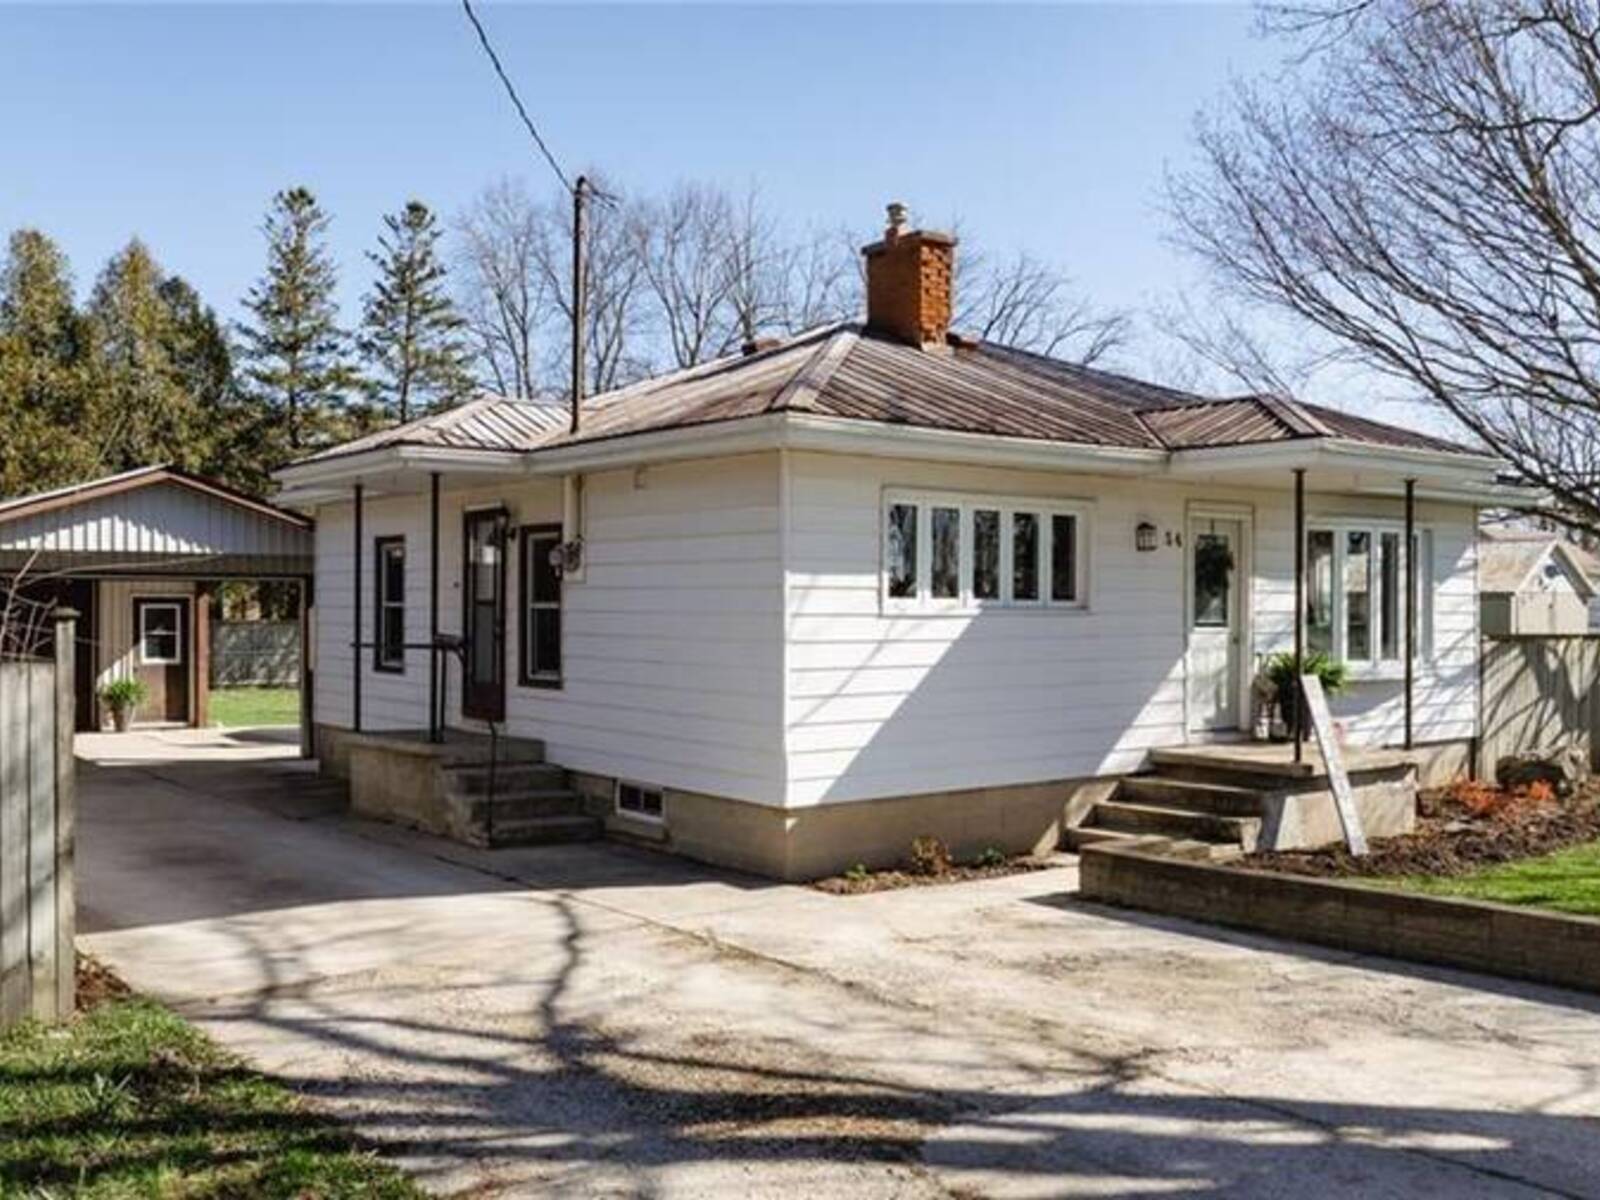 54 MILL Road E, Brucefield, Ontario N0M 1J0